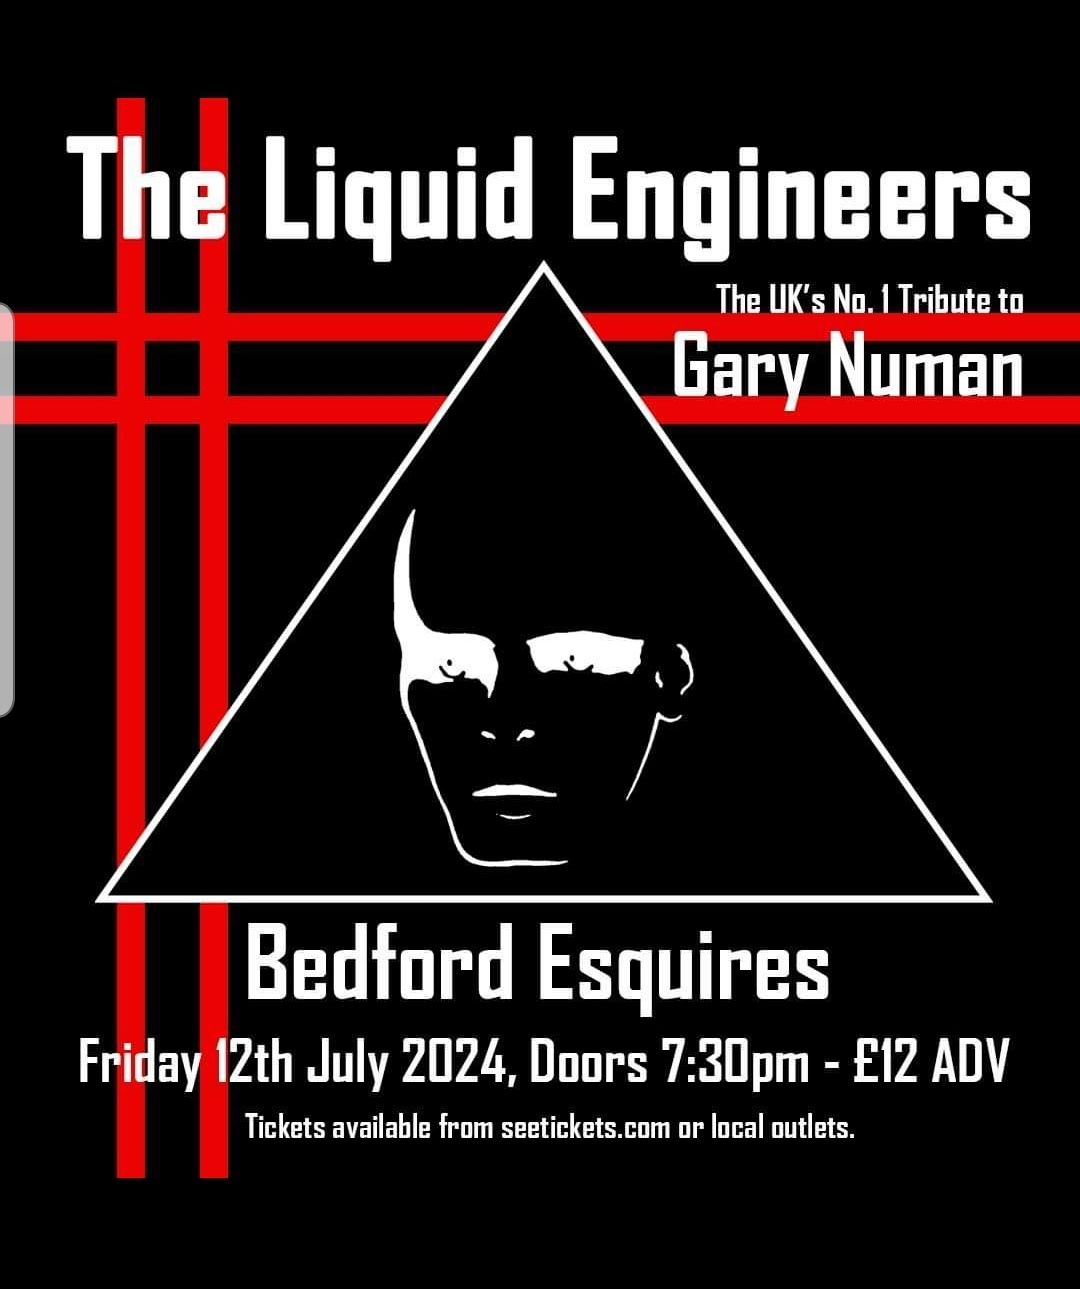 The Liquid Engineers The Complete Gary Numan Experience-BEDFORD